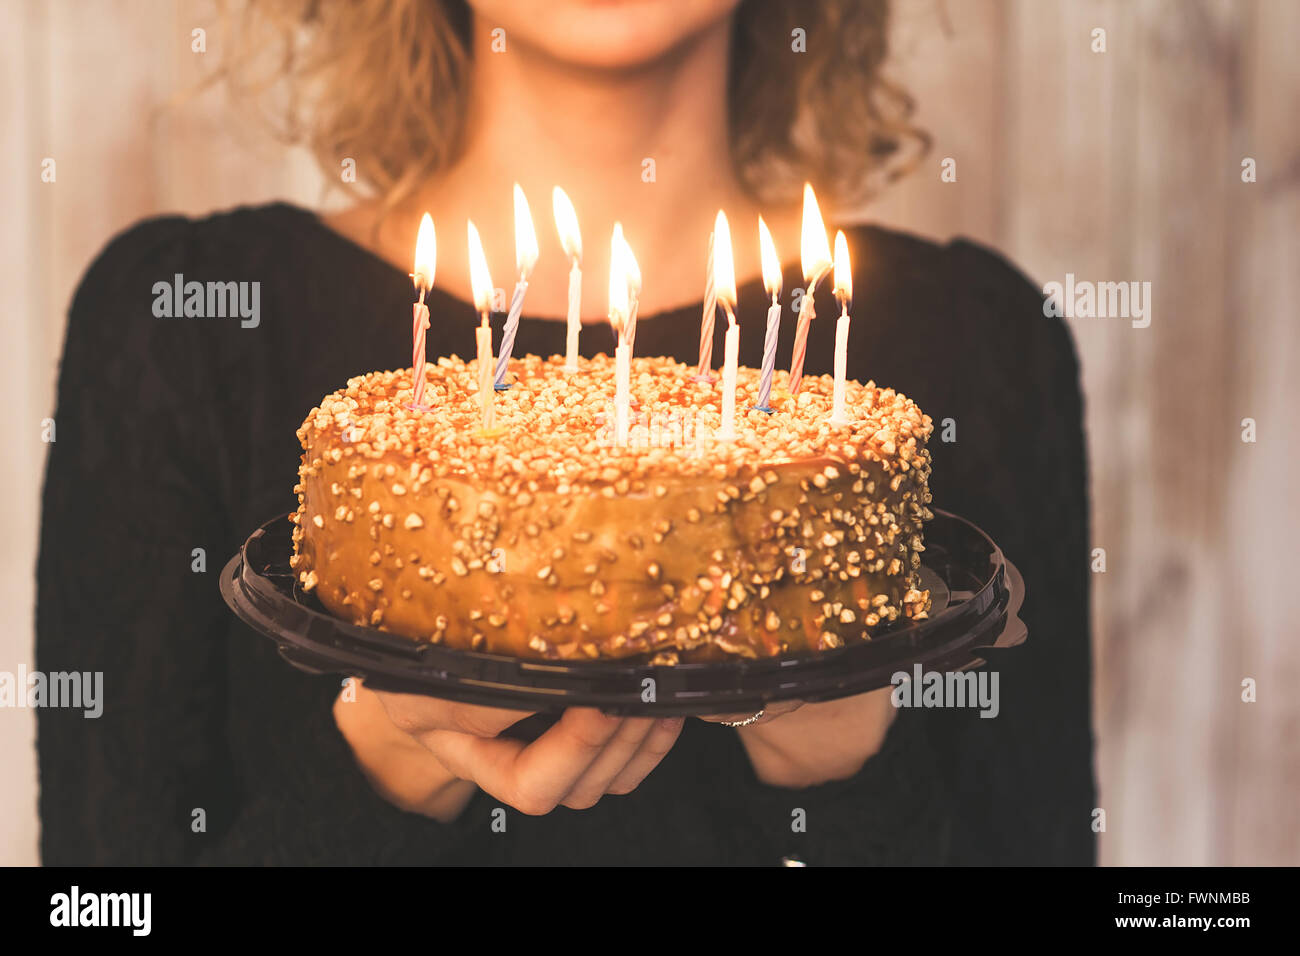 Hands of young woman holding birthday cake selective focus Stock Photo